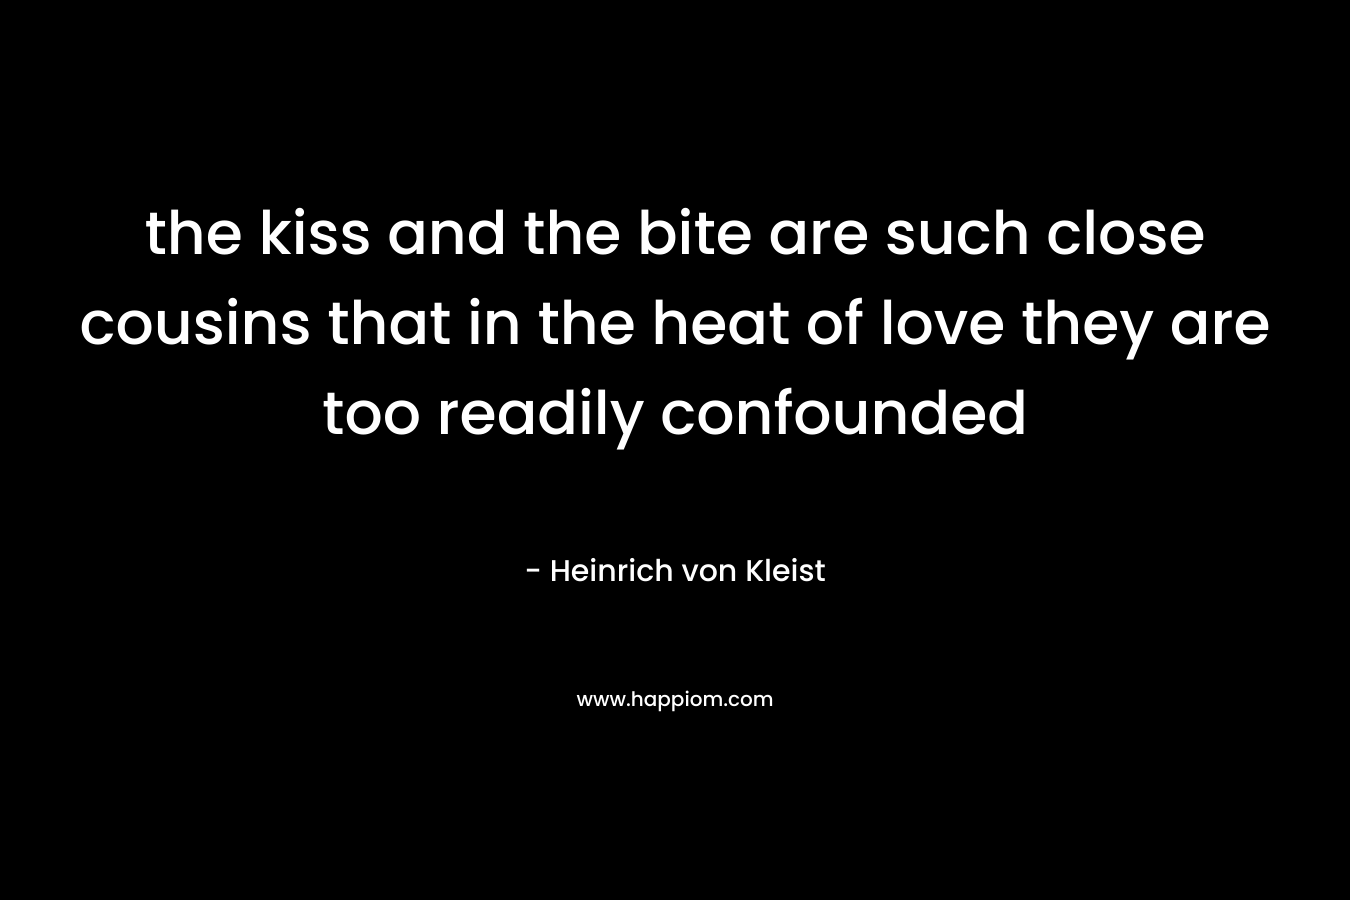 the kiss and the bite are such close cousins that in the heat of love they are too readily confounded – Heinrich von Kleist